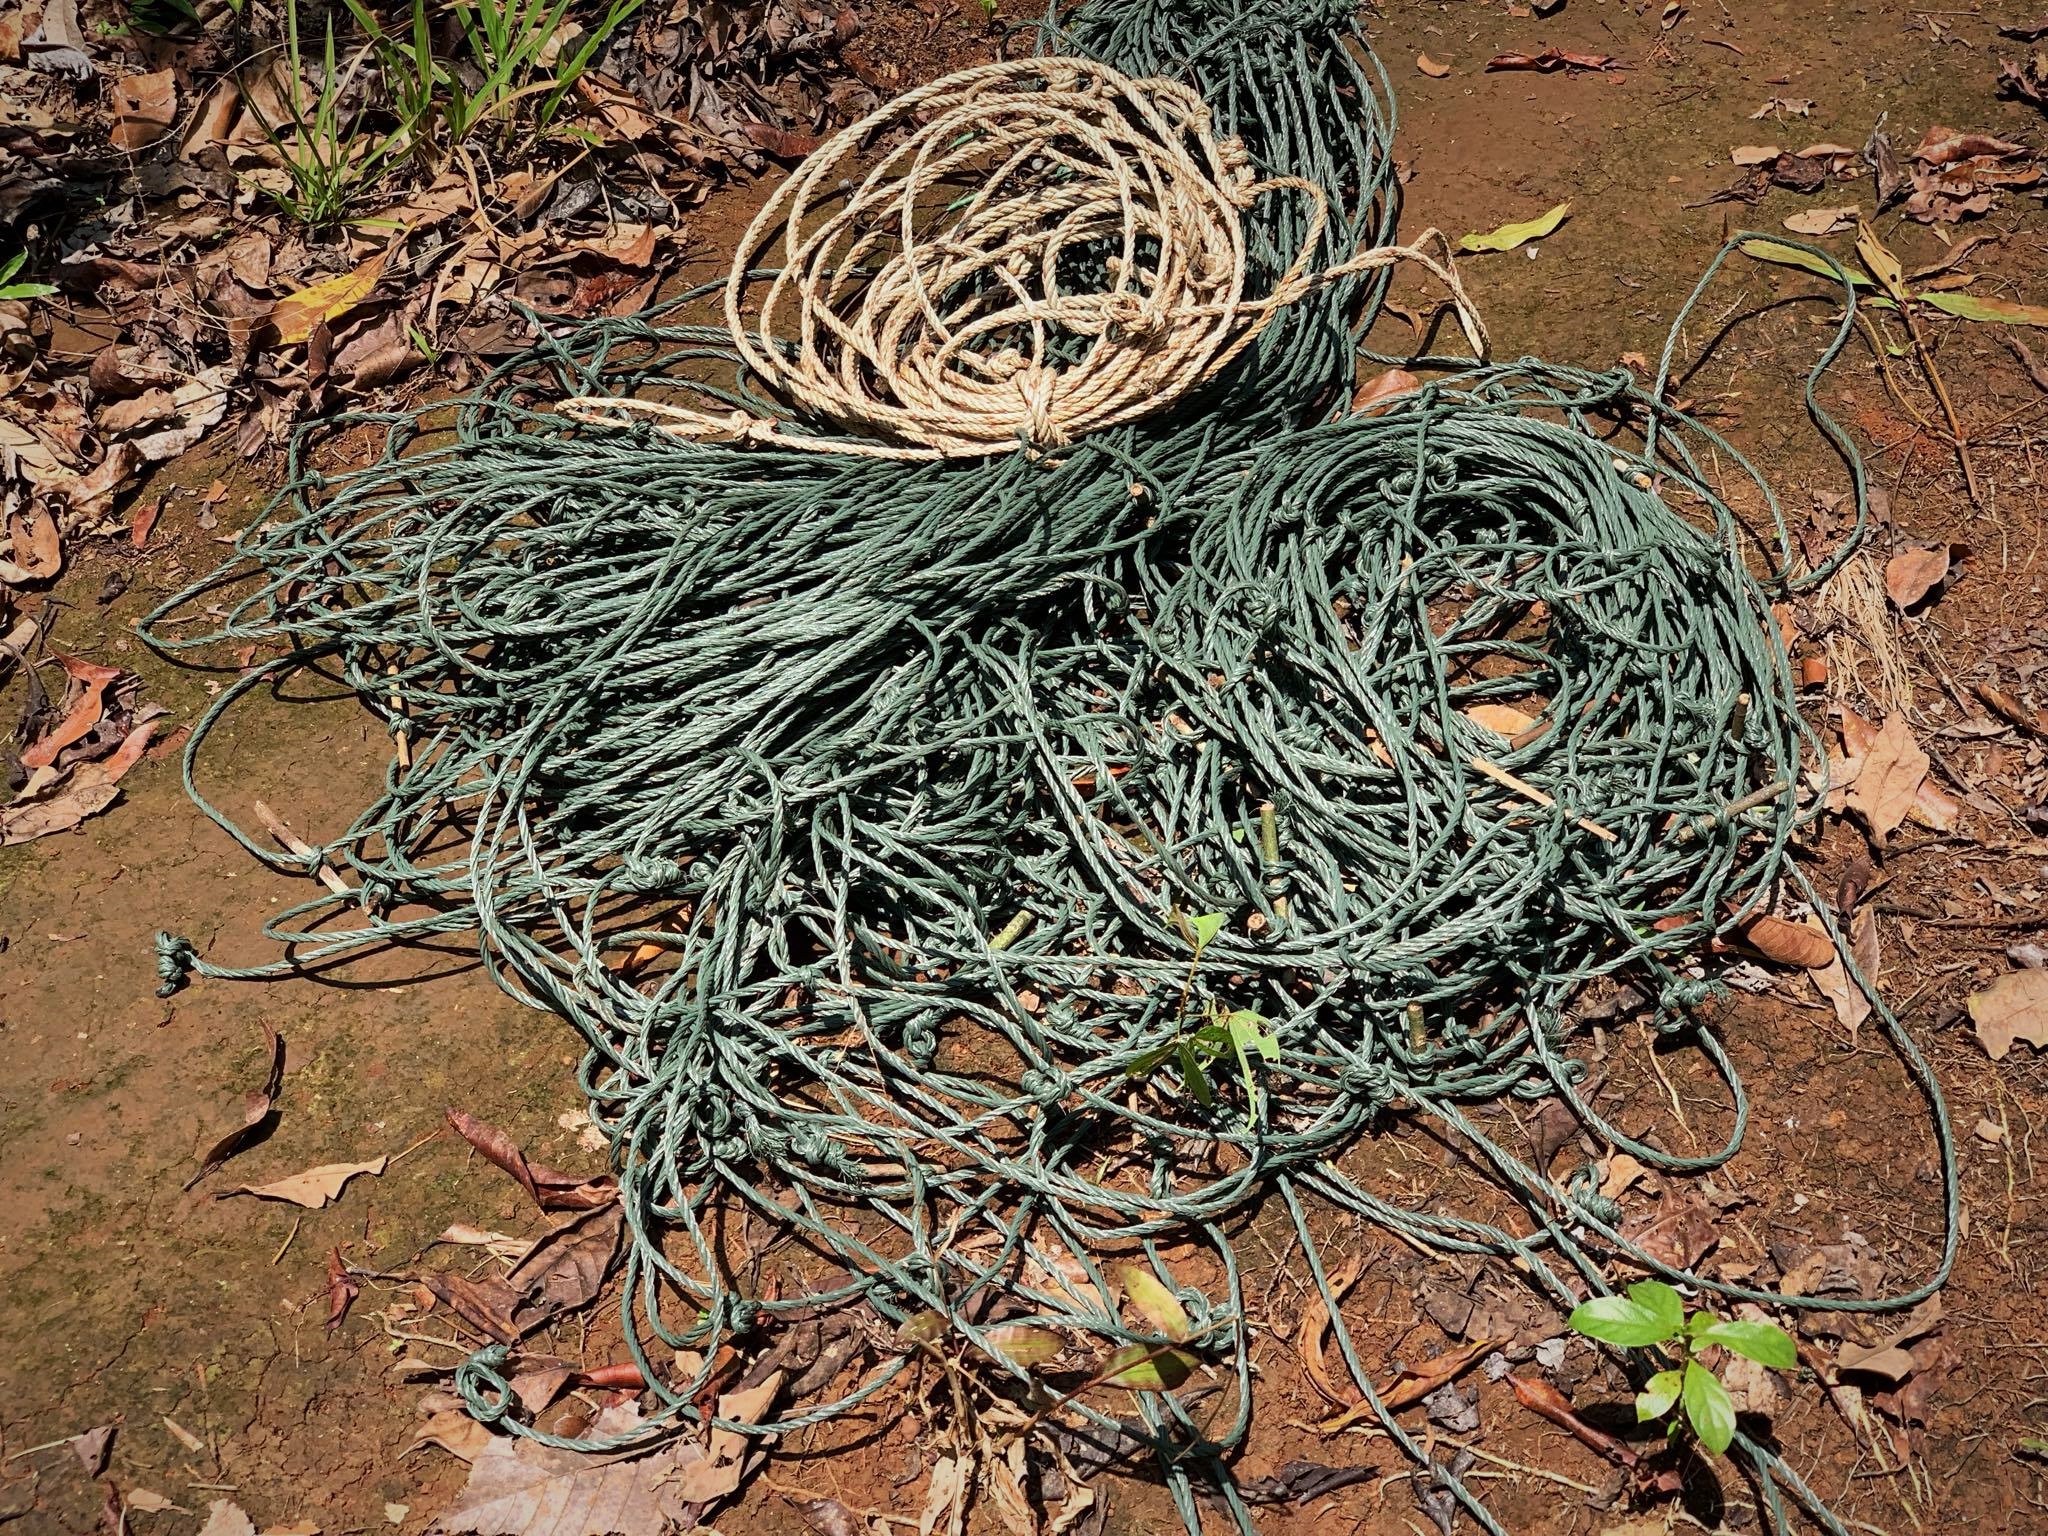 Snares are lethal weapons that trap and kill animals - Wildlife Alliance